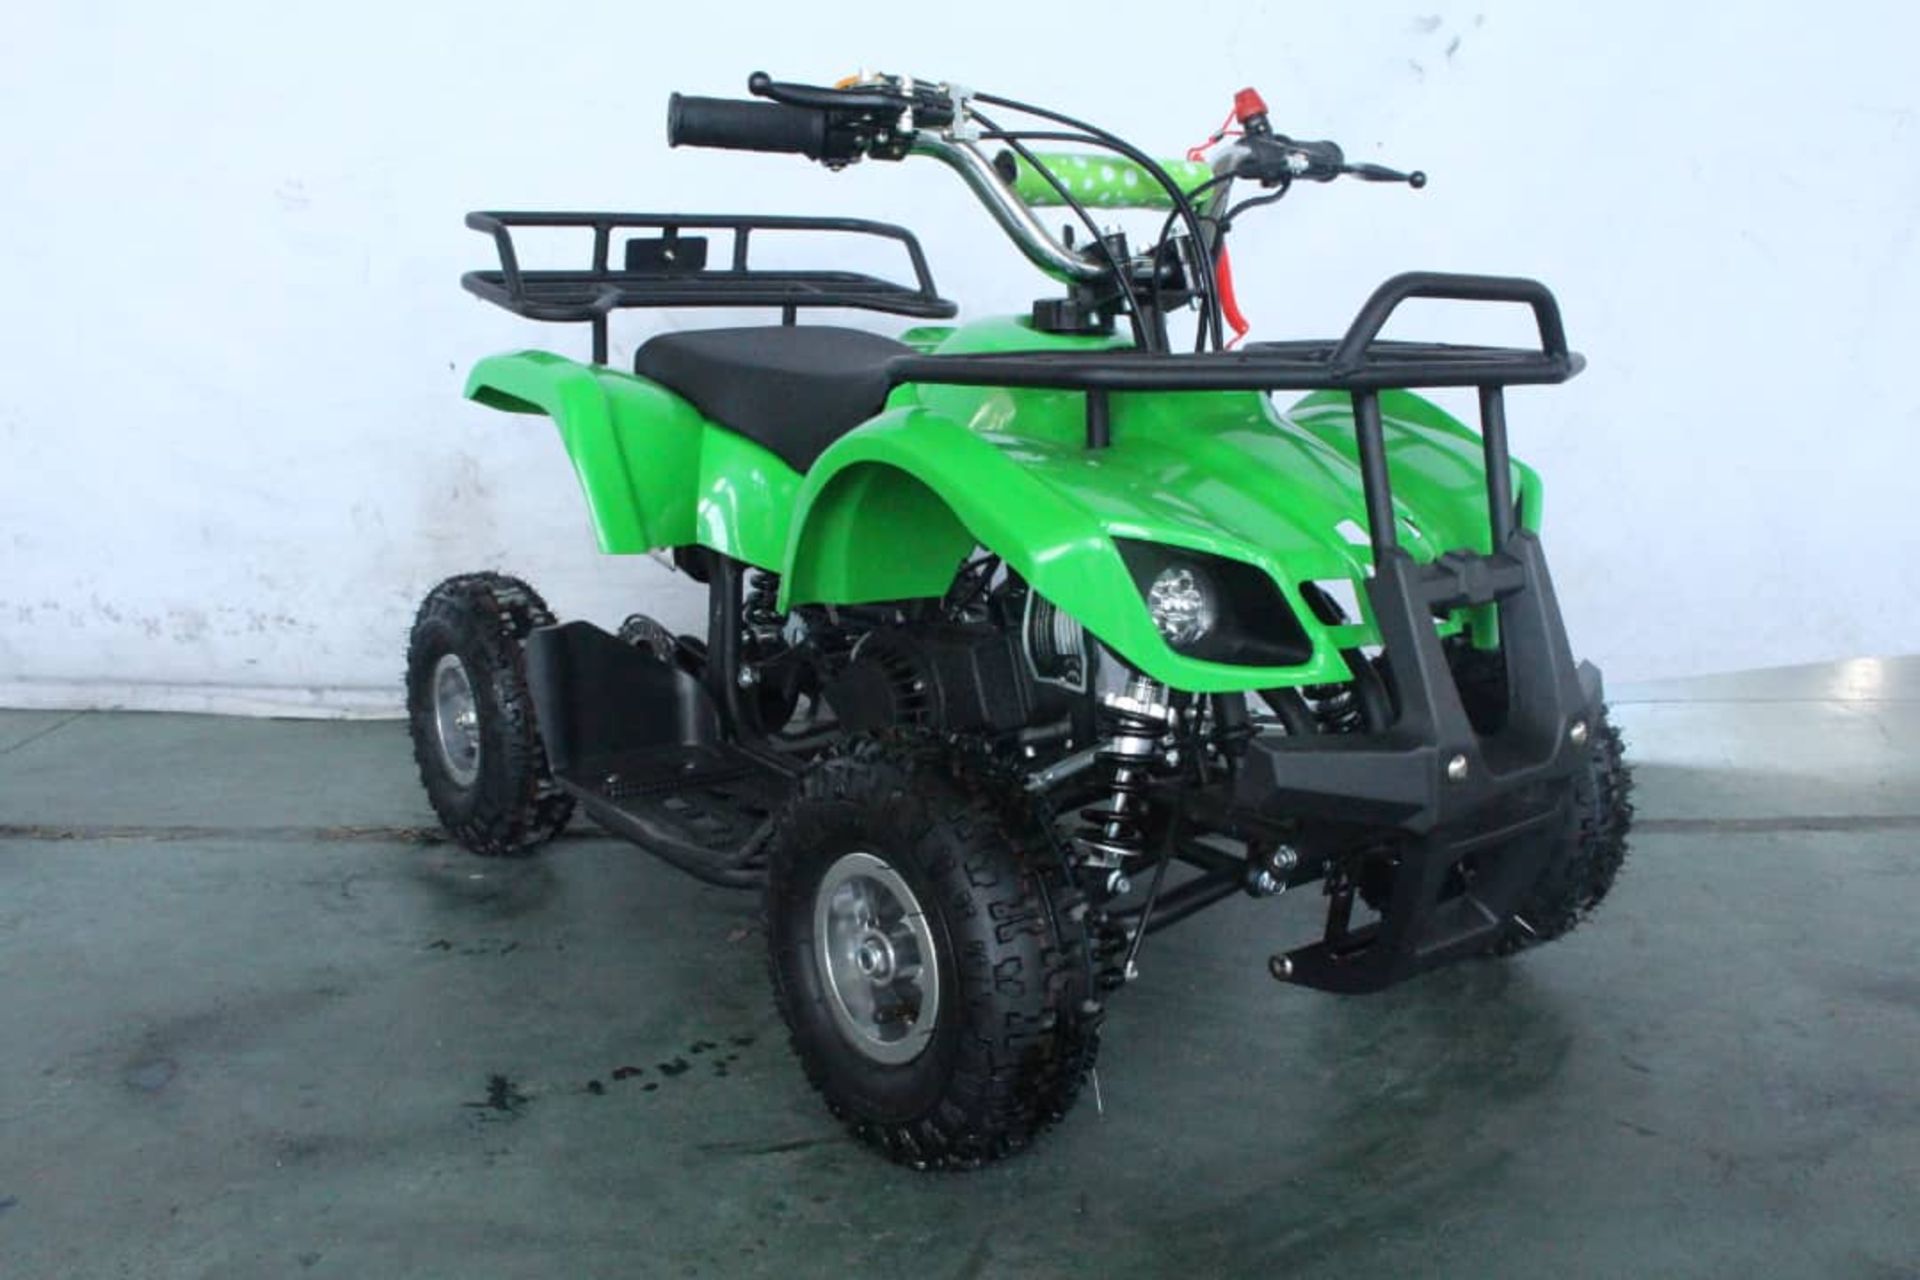 + VAT Brand New 50cc Mini Quad Bike FRM - Colours May Vary - Picture May Vary From Actual Item - Image 6 of 9